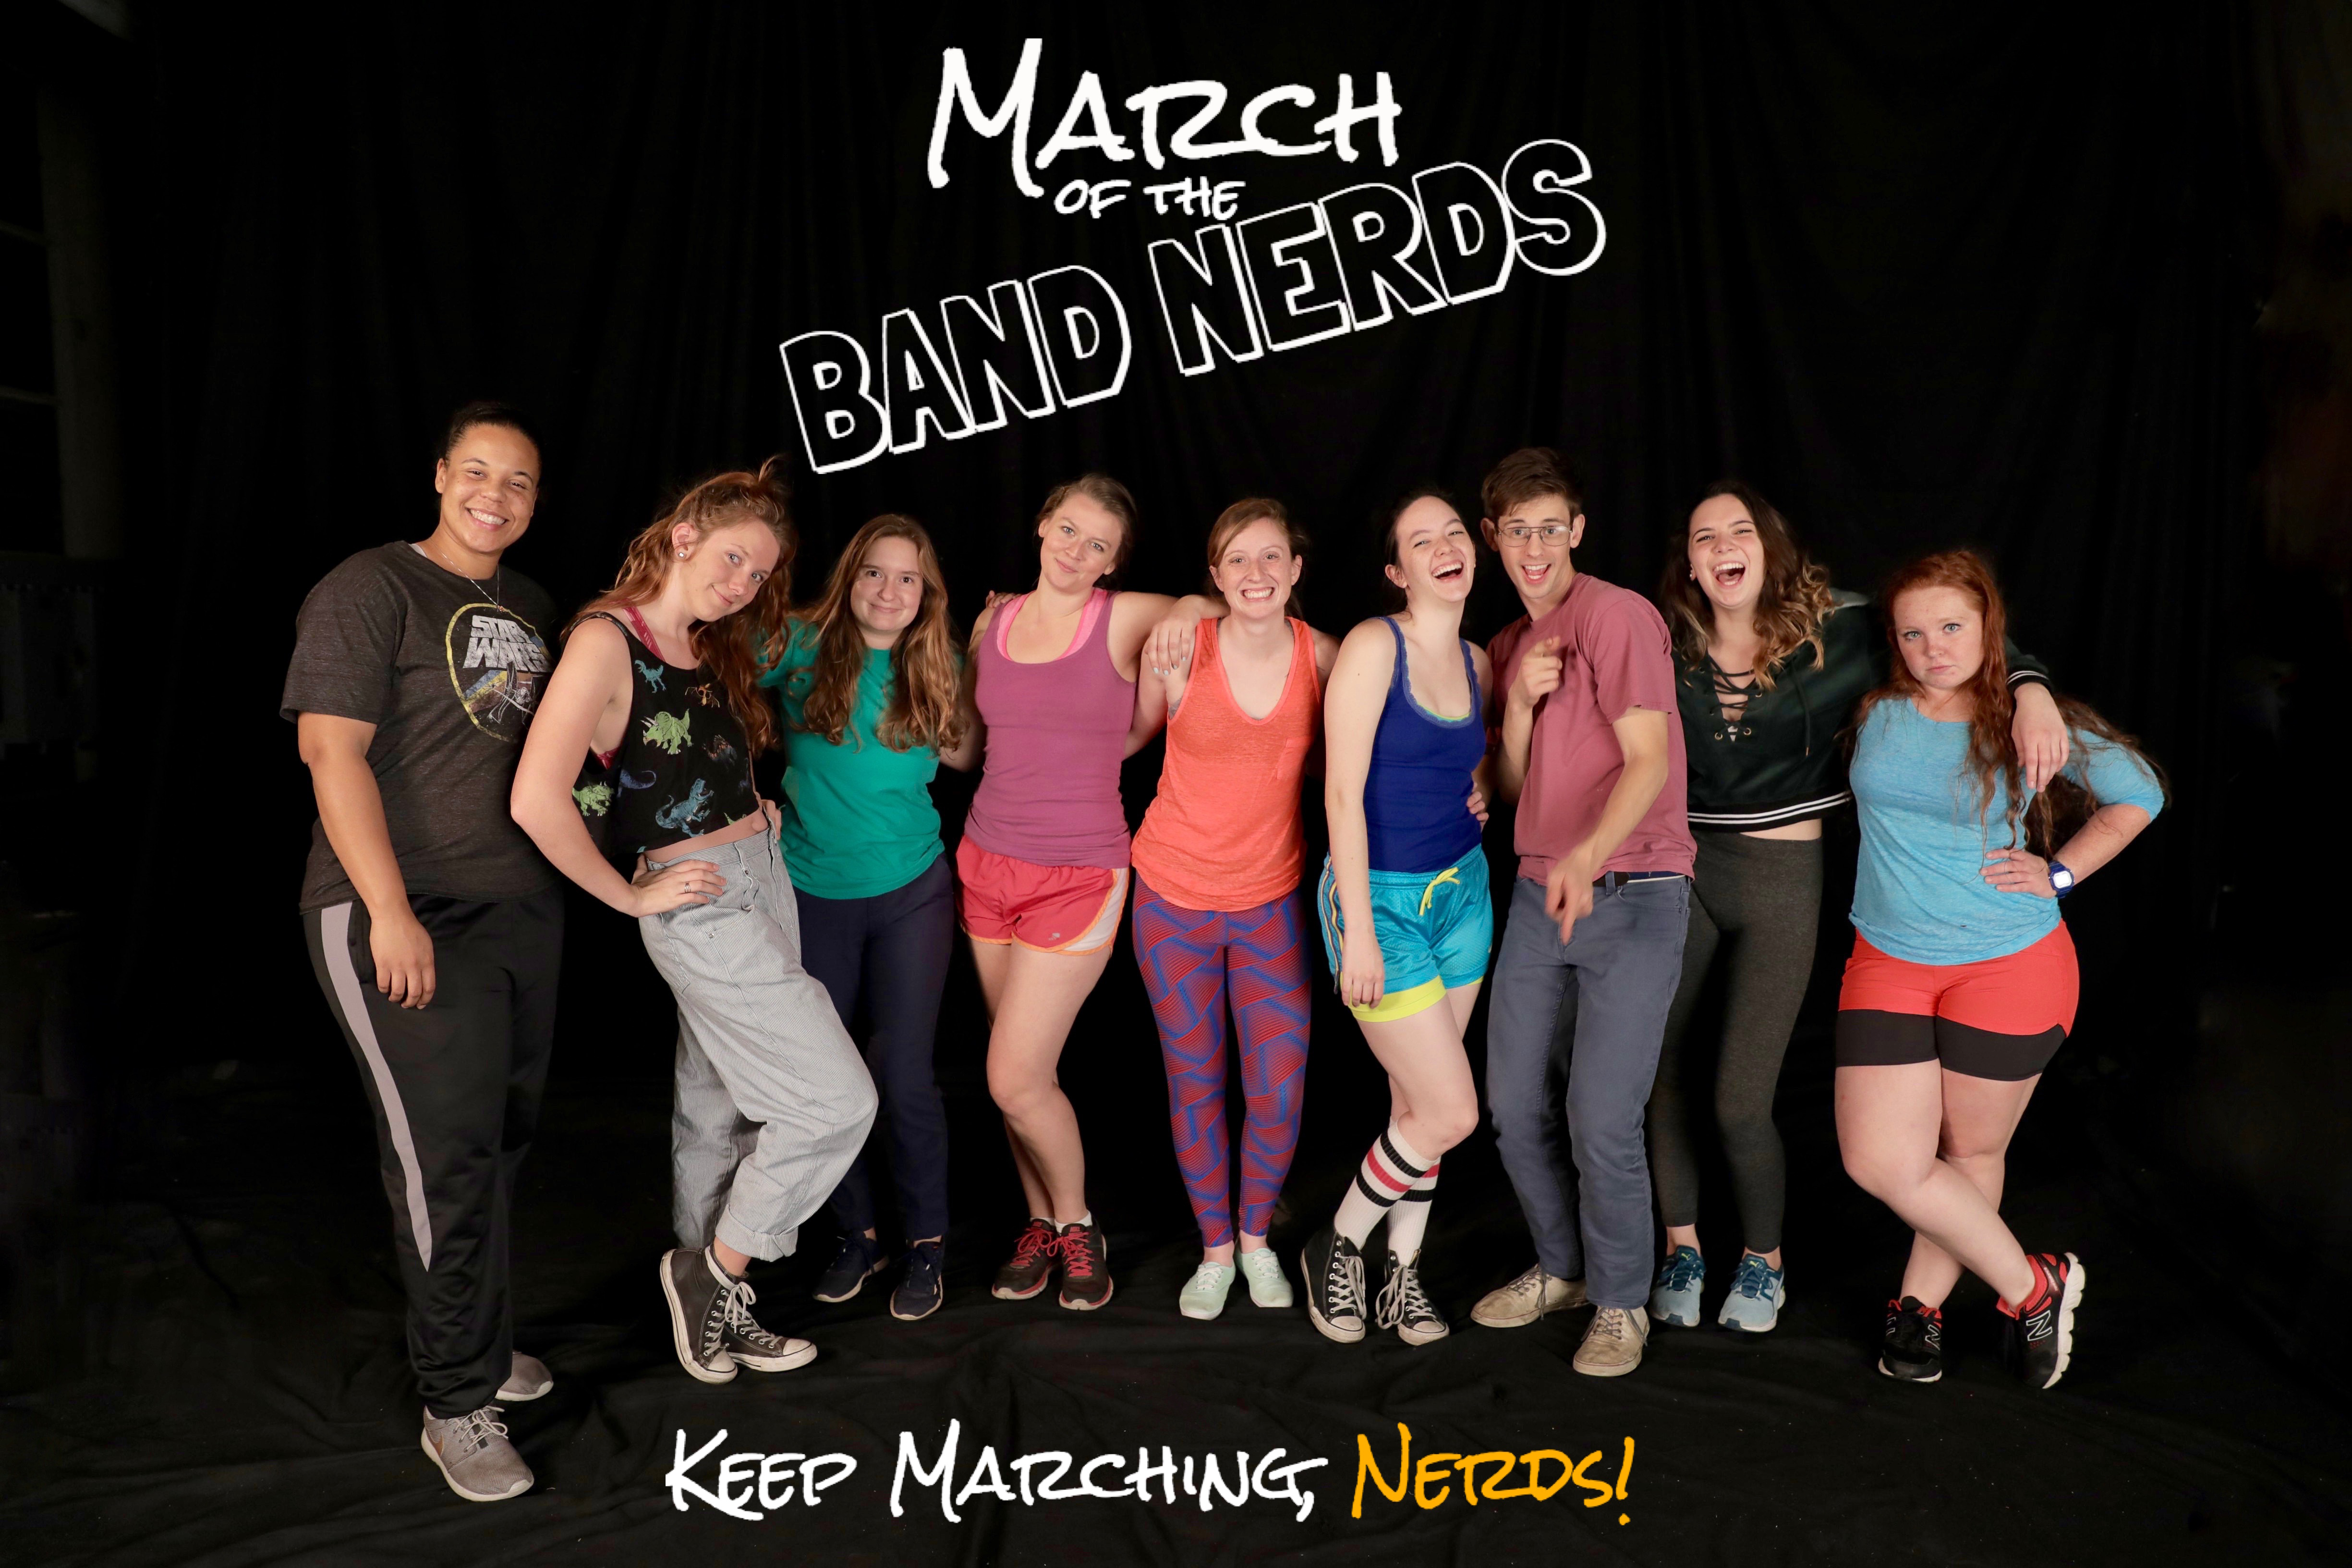 March of the Band Nerds